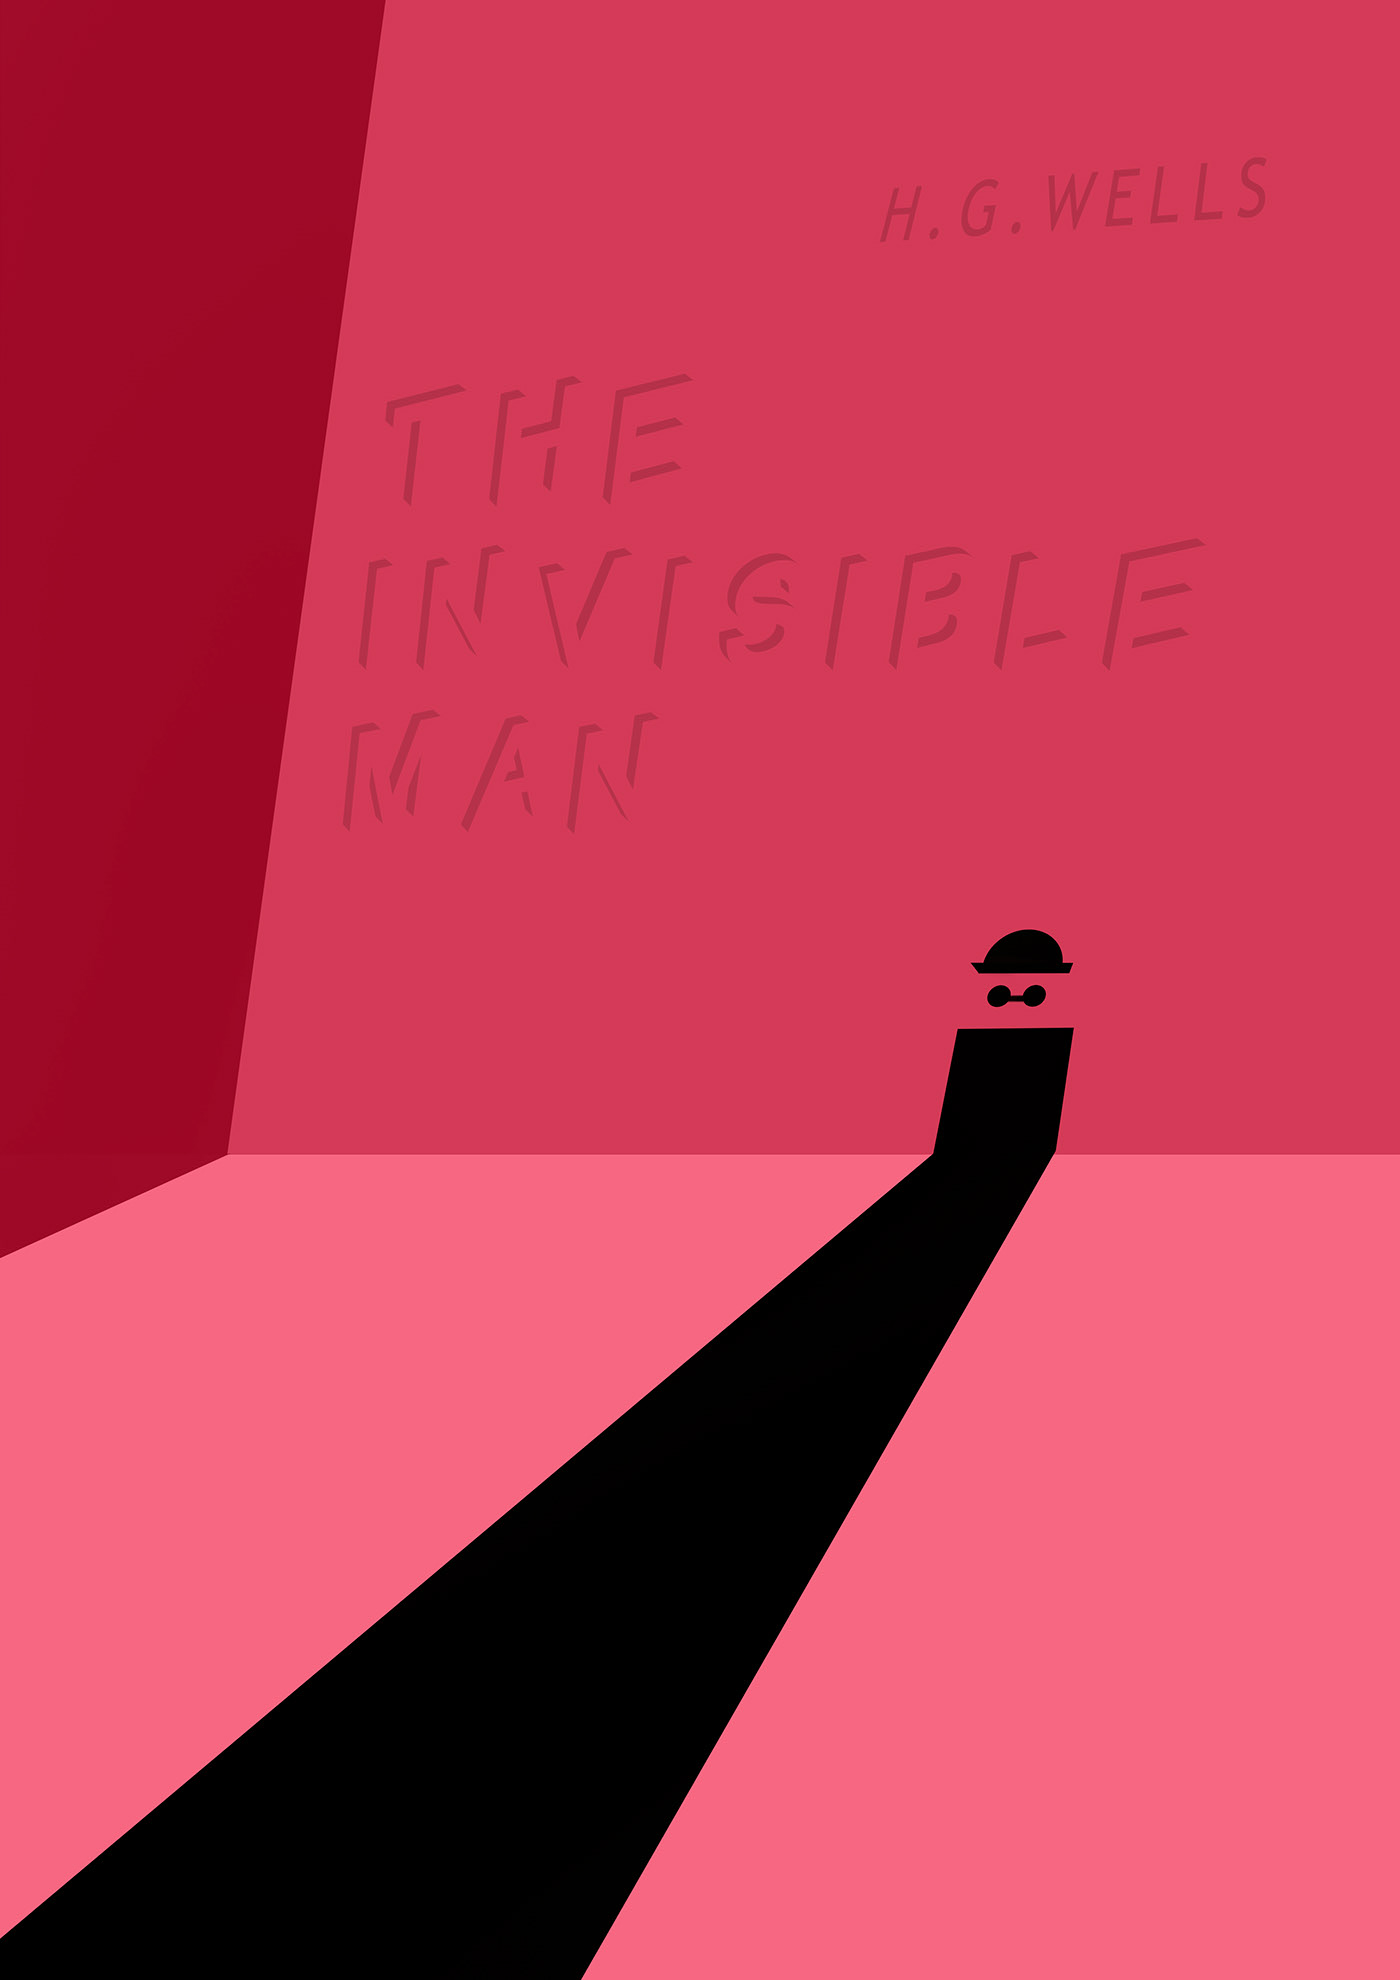 design hgwells horror Terror The Invisible Man